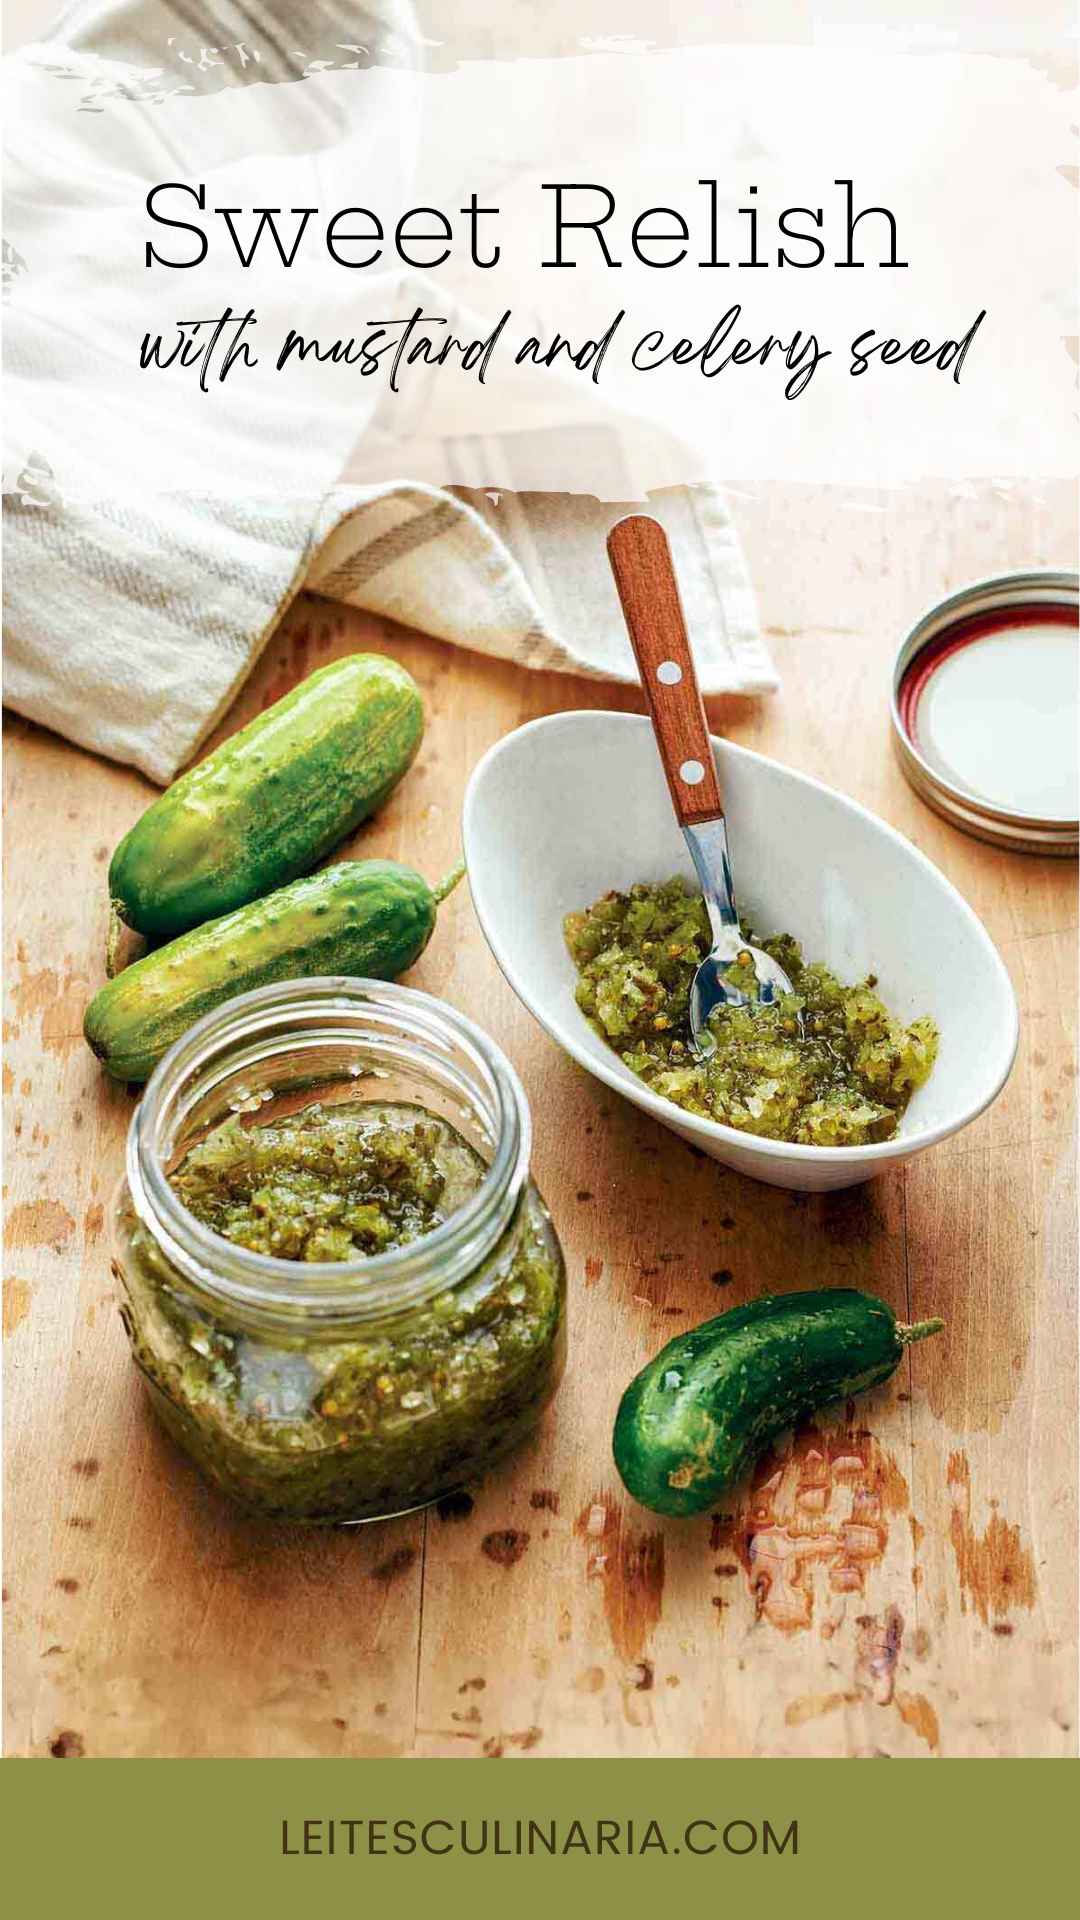 A small jar of sweet pickle relish with some more relish in a bowl nearby and some small pickling cucumbers next to the jar.